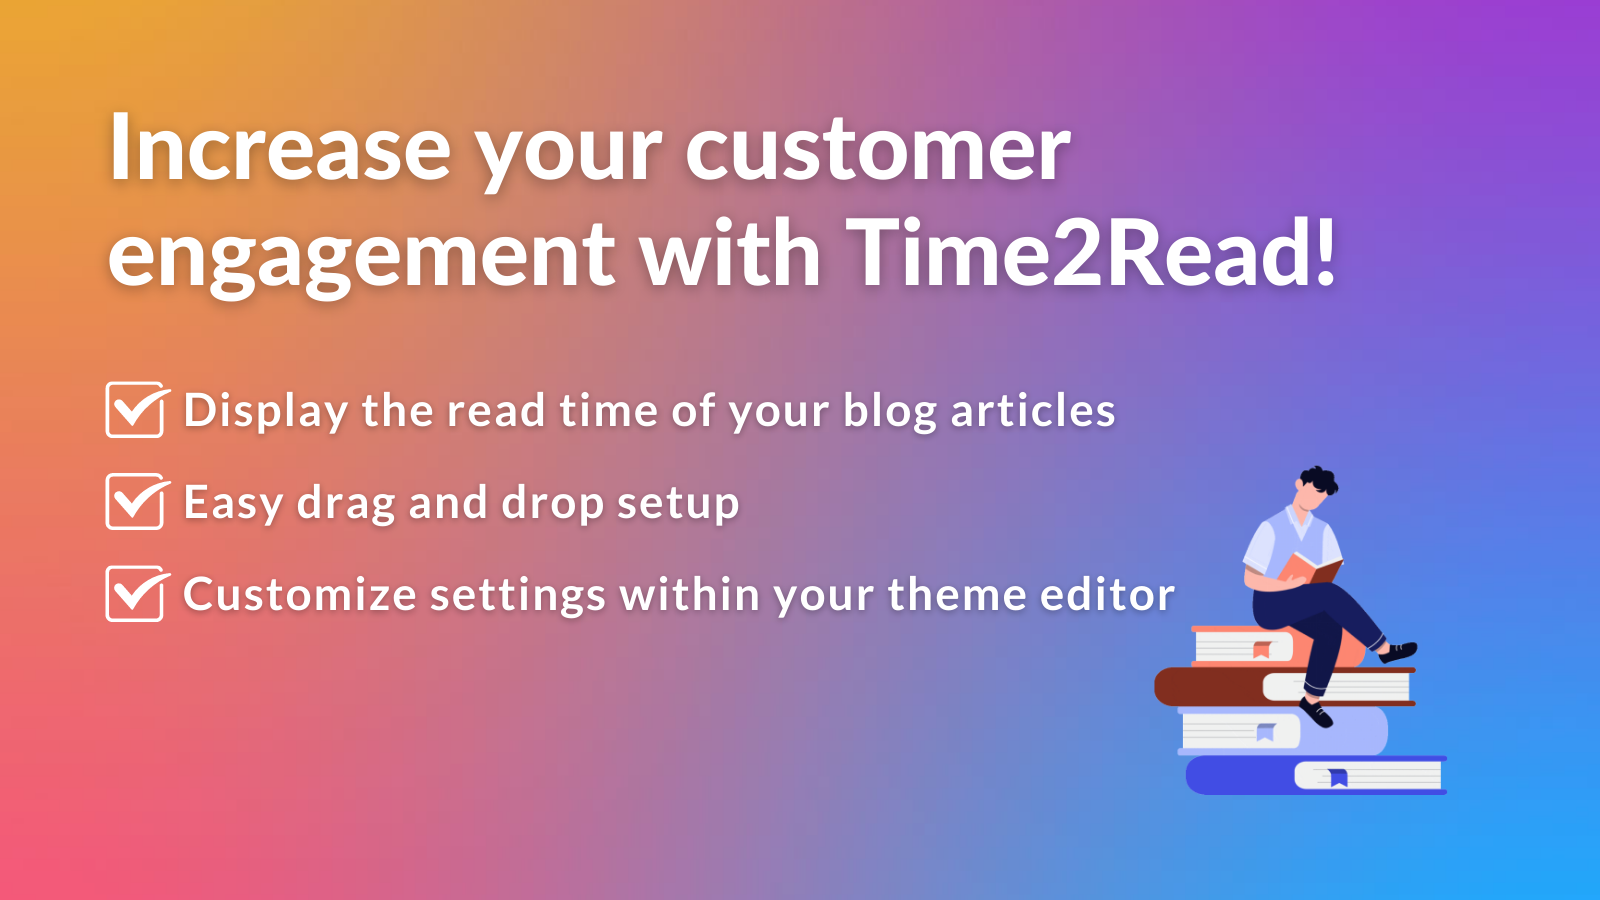 Increase your customer engagement with Time2Read!